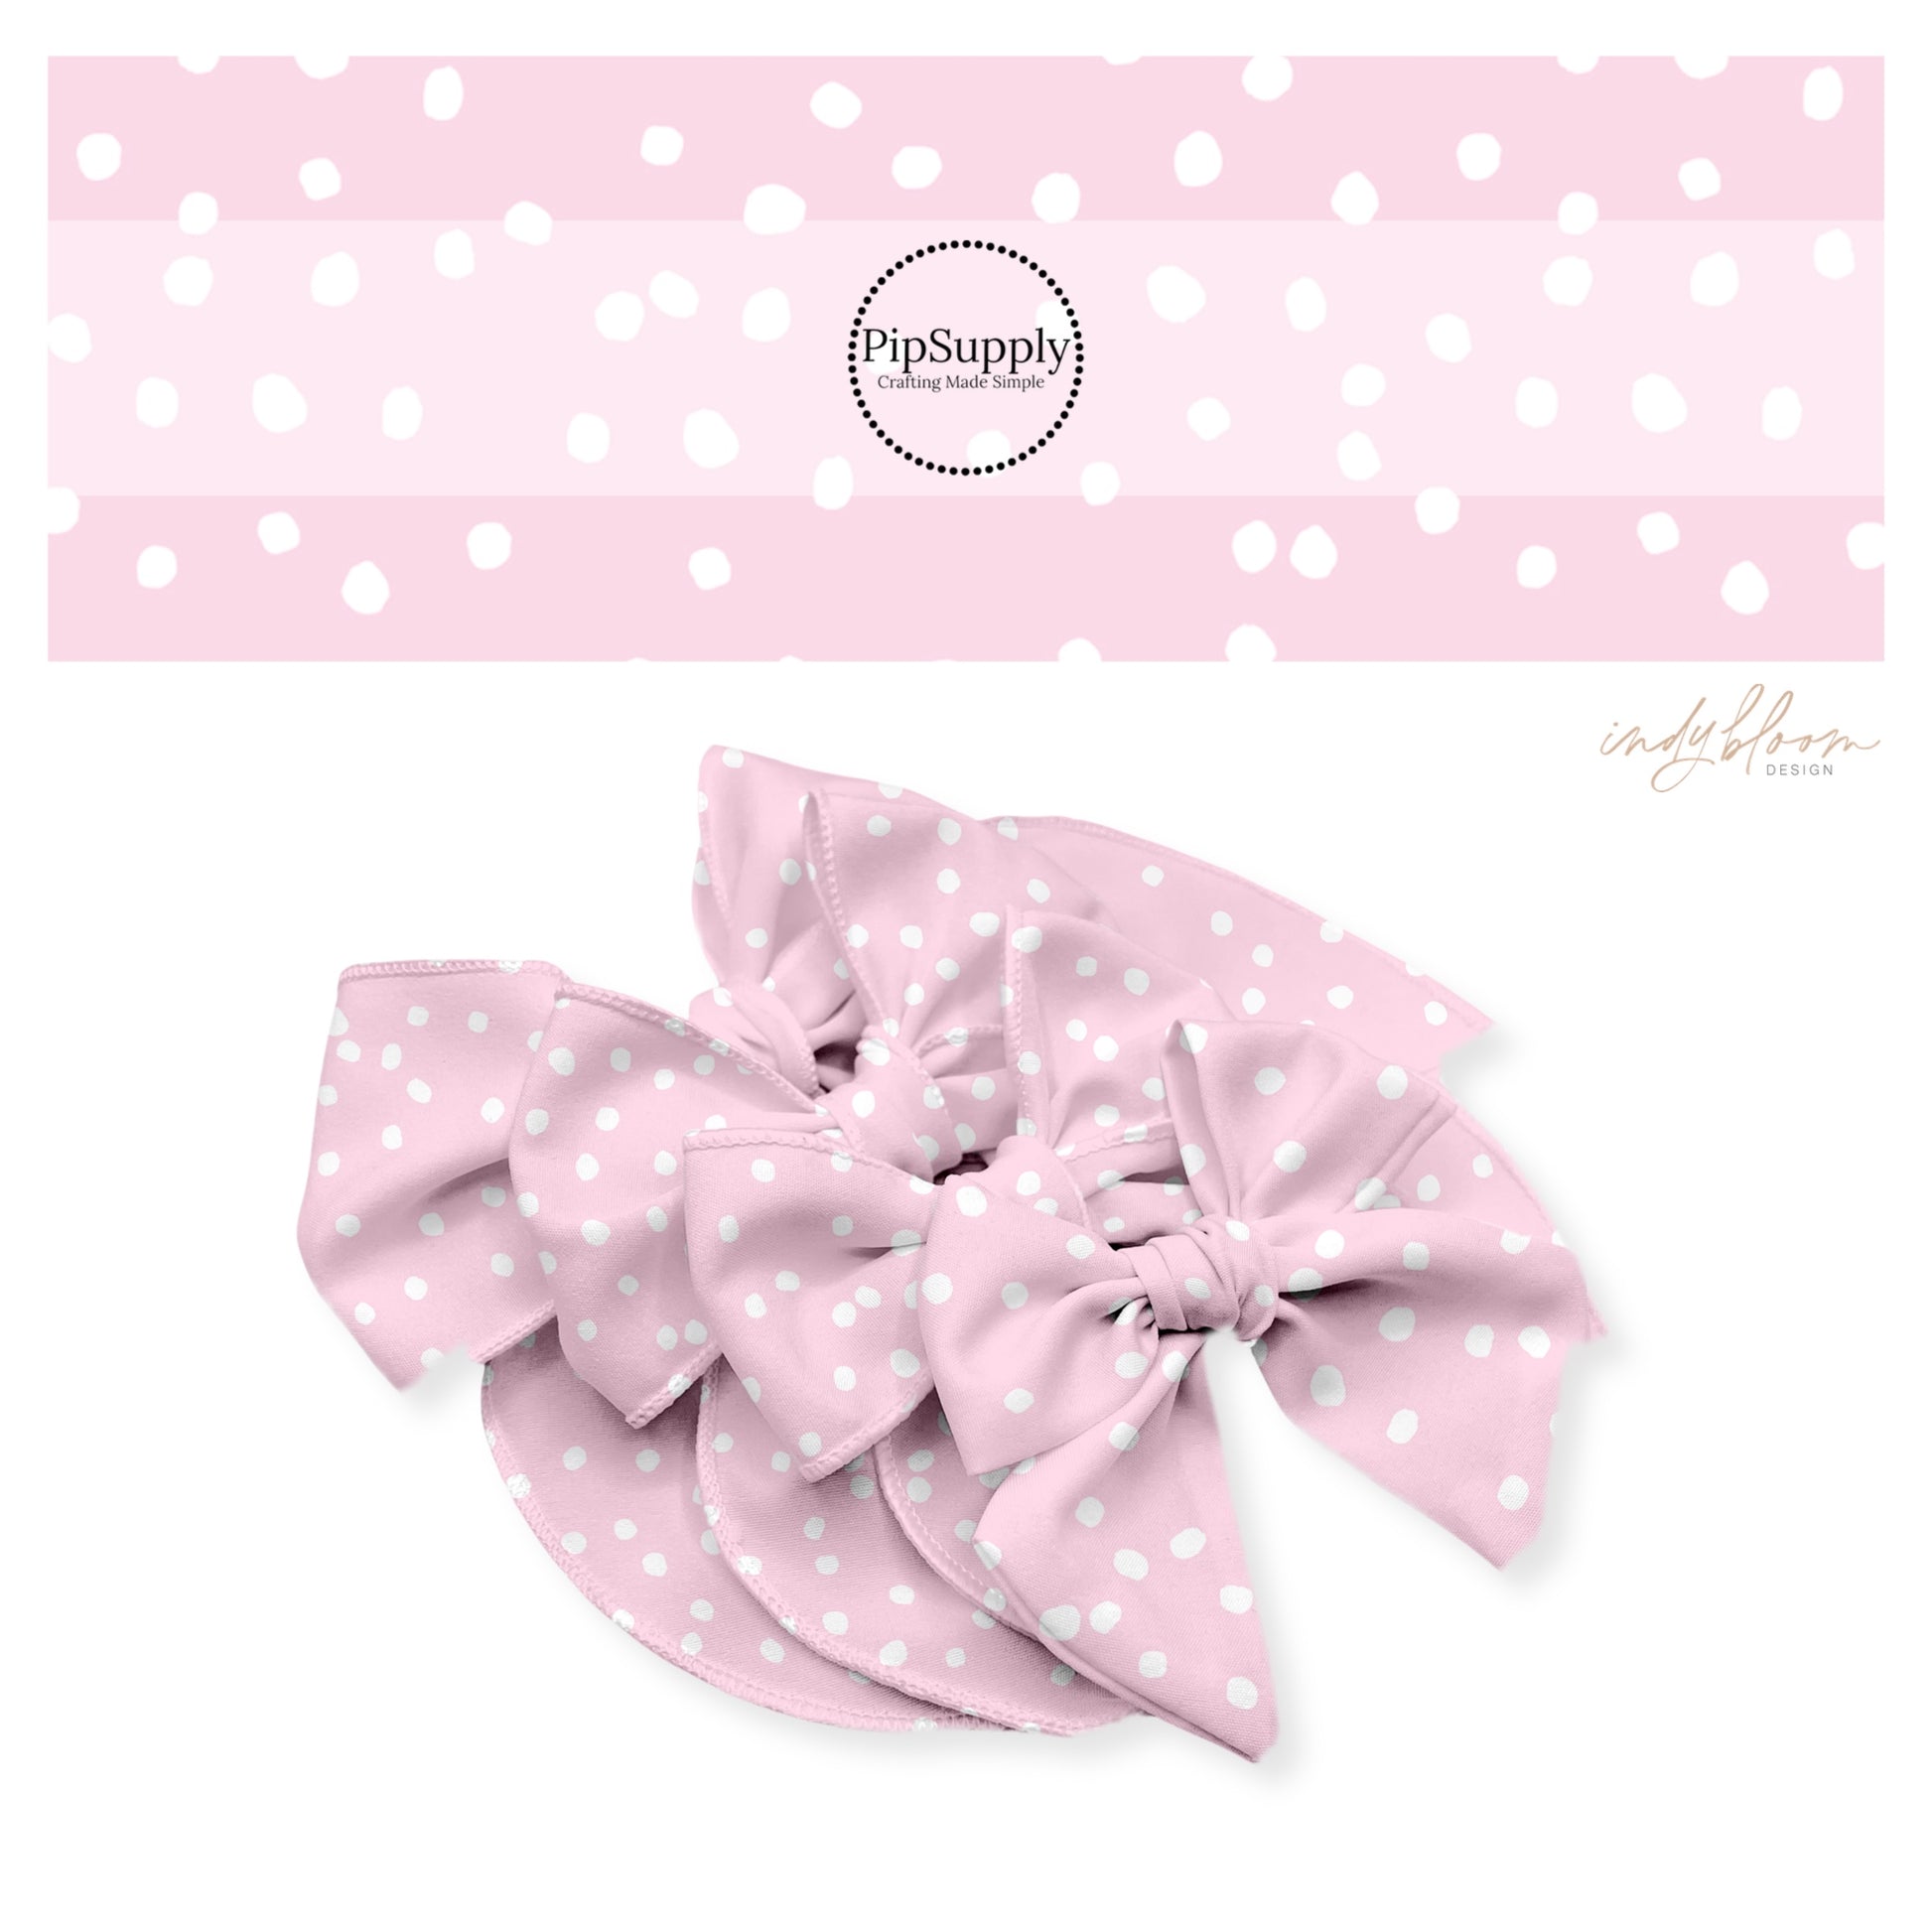 Tiny white dots on rose pink bow strips